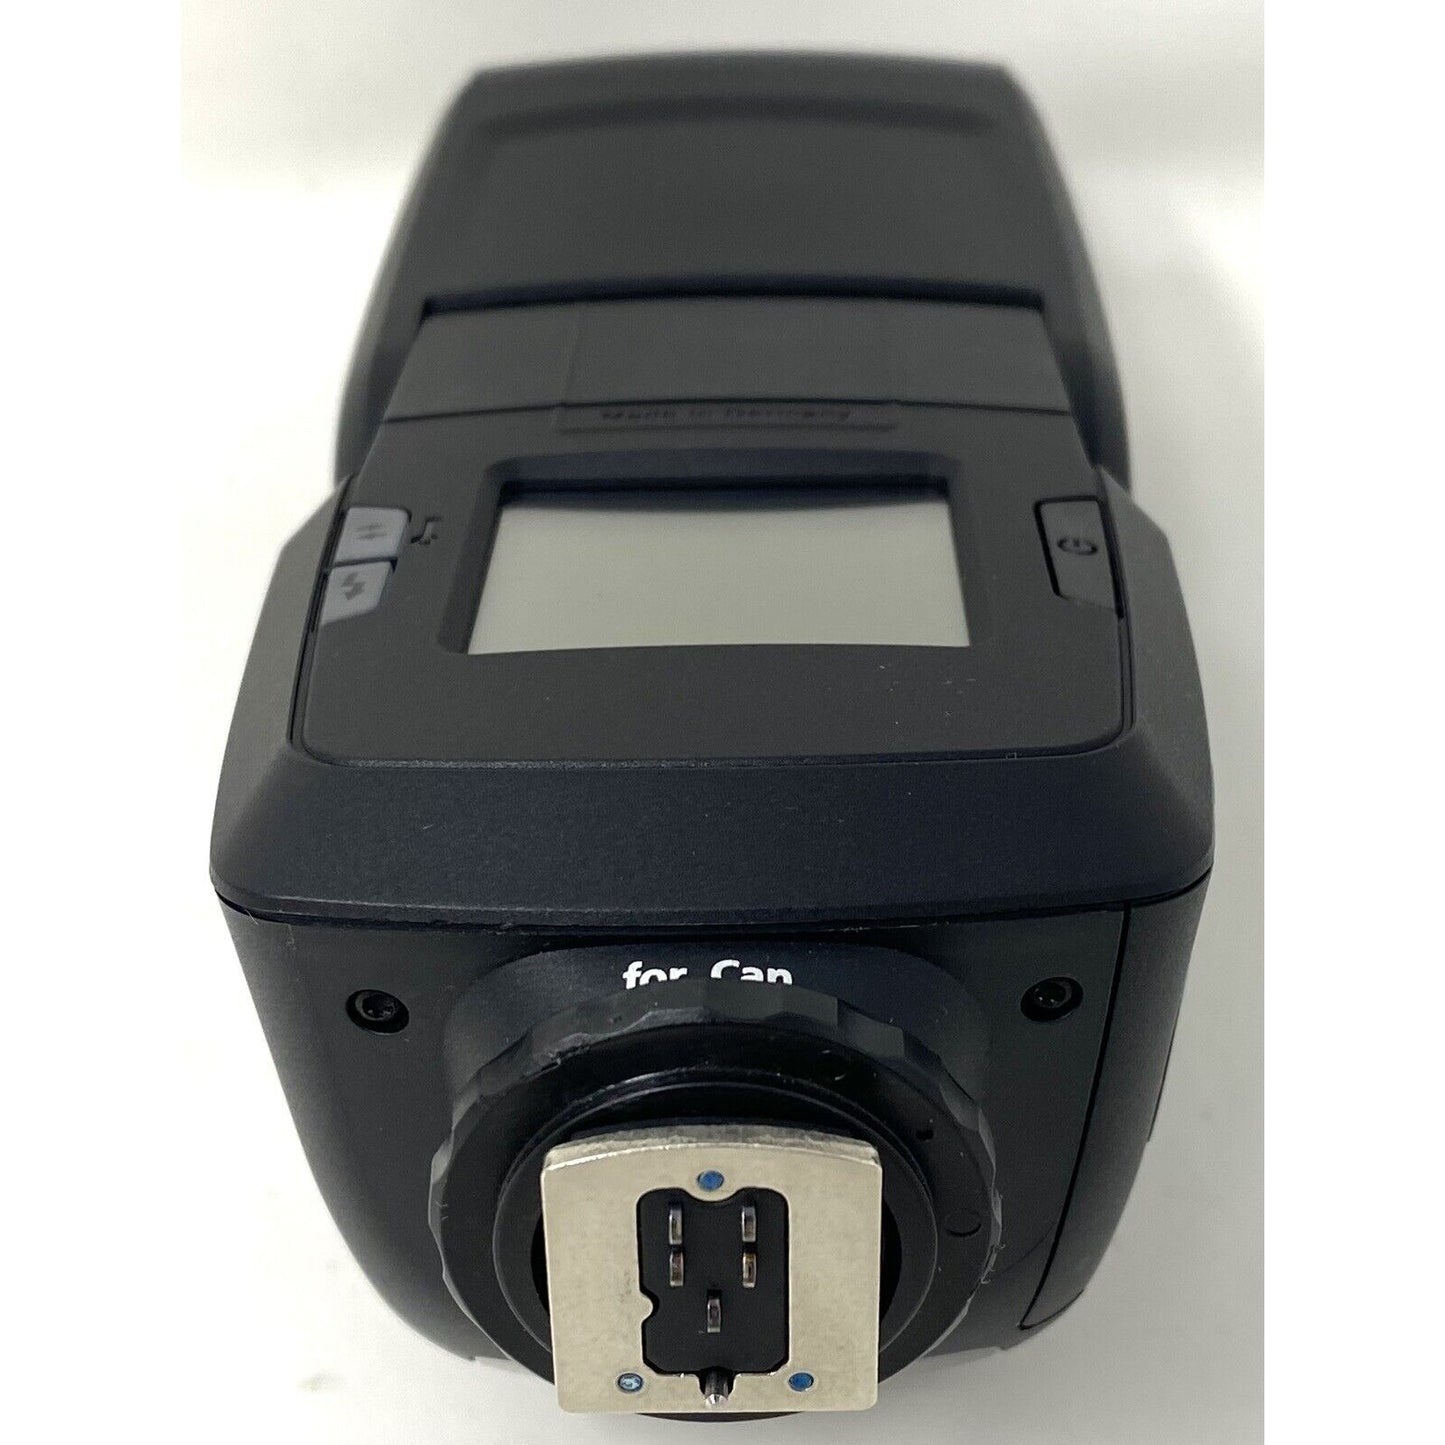 External Flash B520 AF for Canon by Metz Professional Solution - Pro Solution